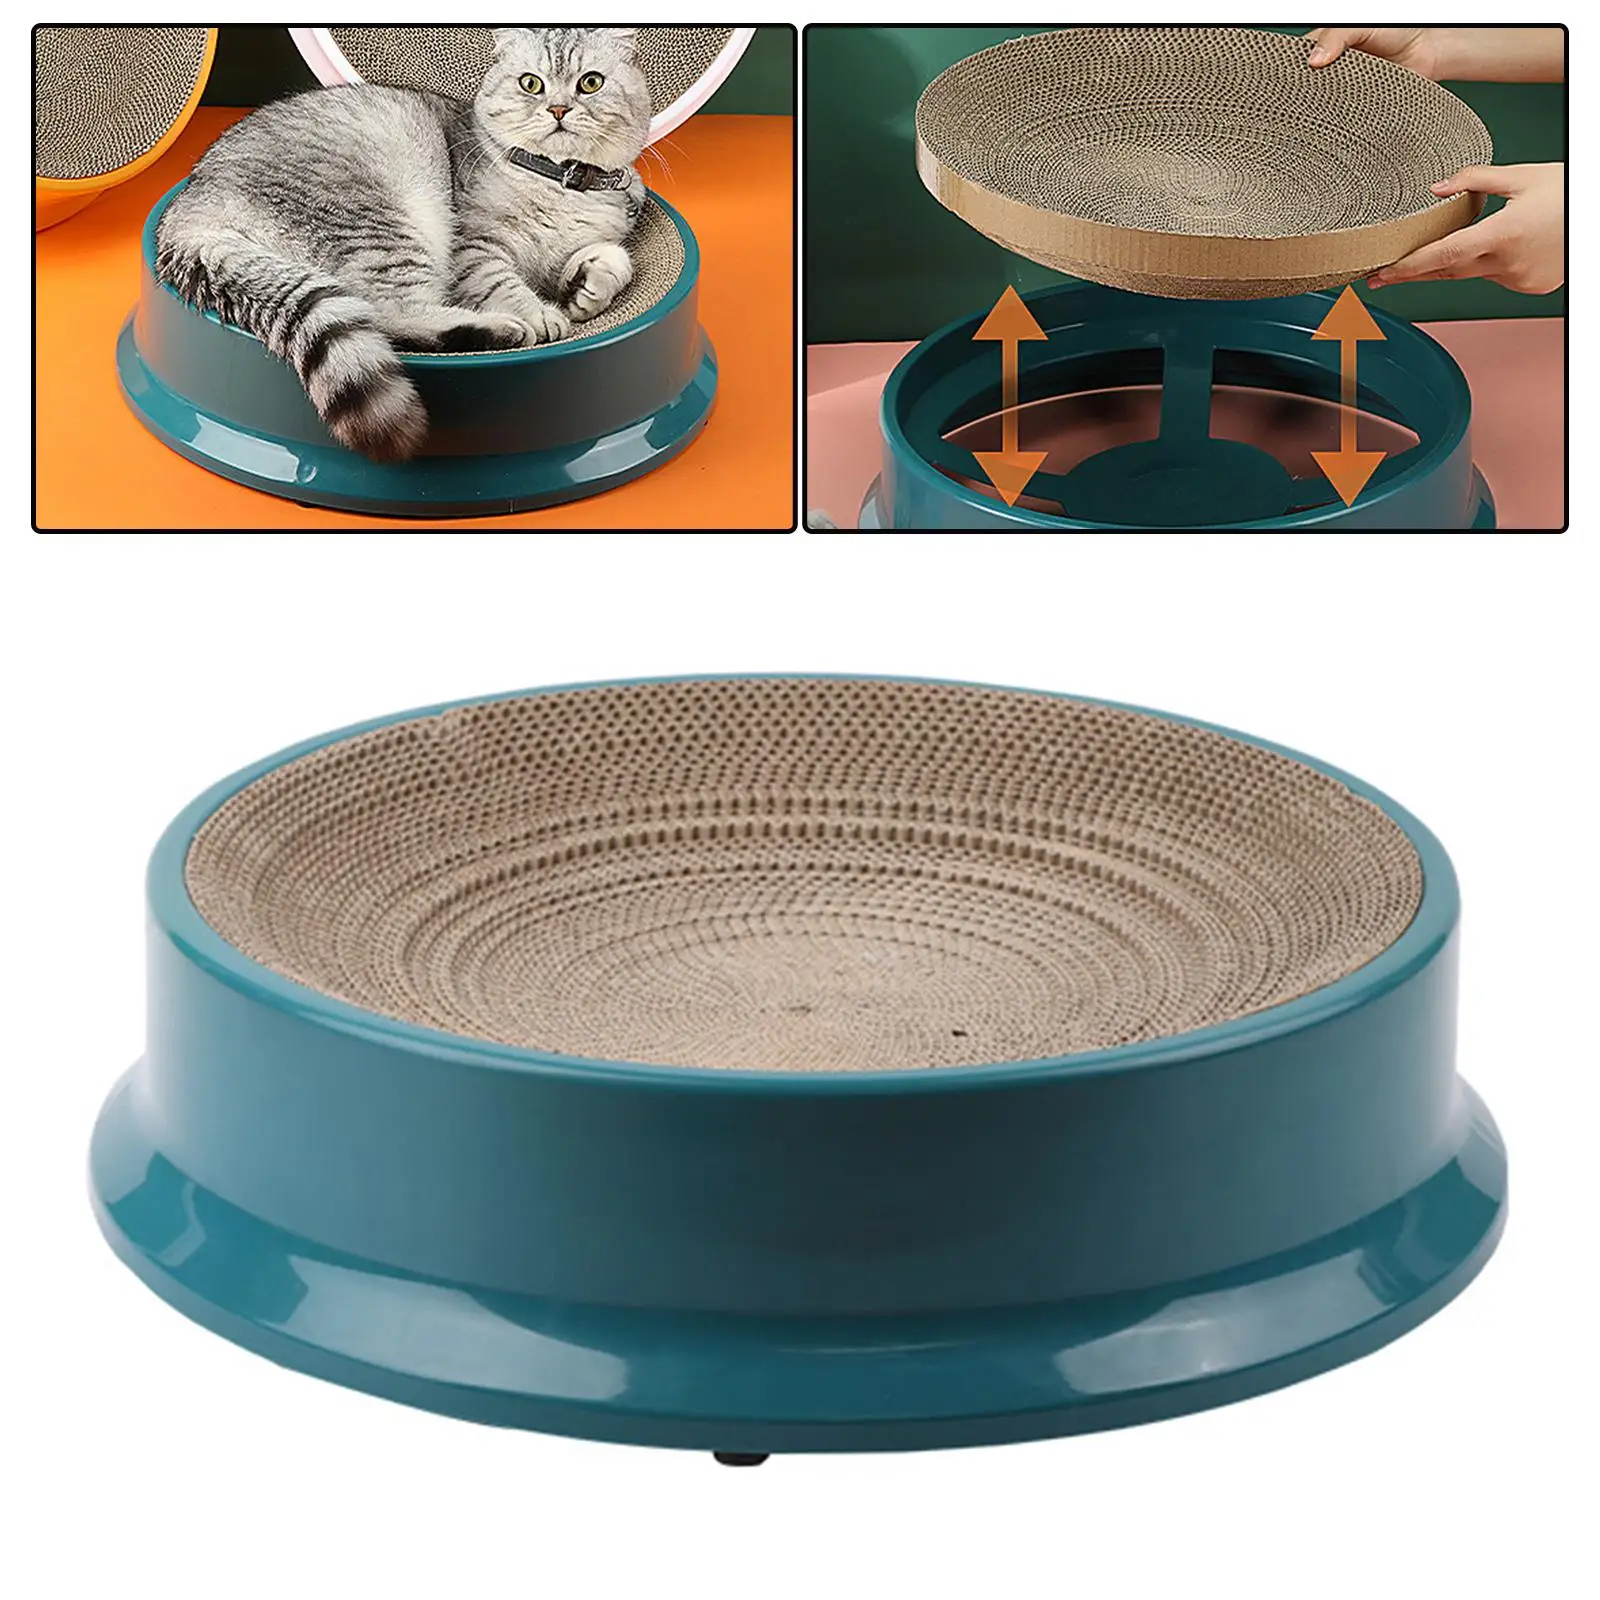 Cat Scratch Pad Wear Resistant Corrugated Reusable Base Durable Scratching Bed Cat Nest for Indoor Outdoor Furniture Protection